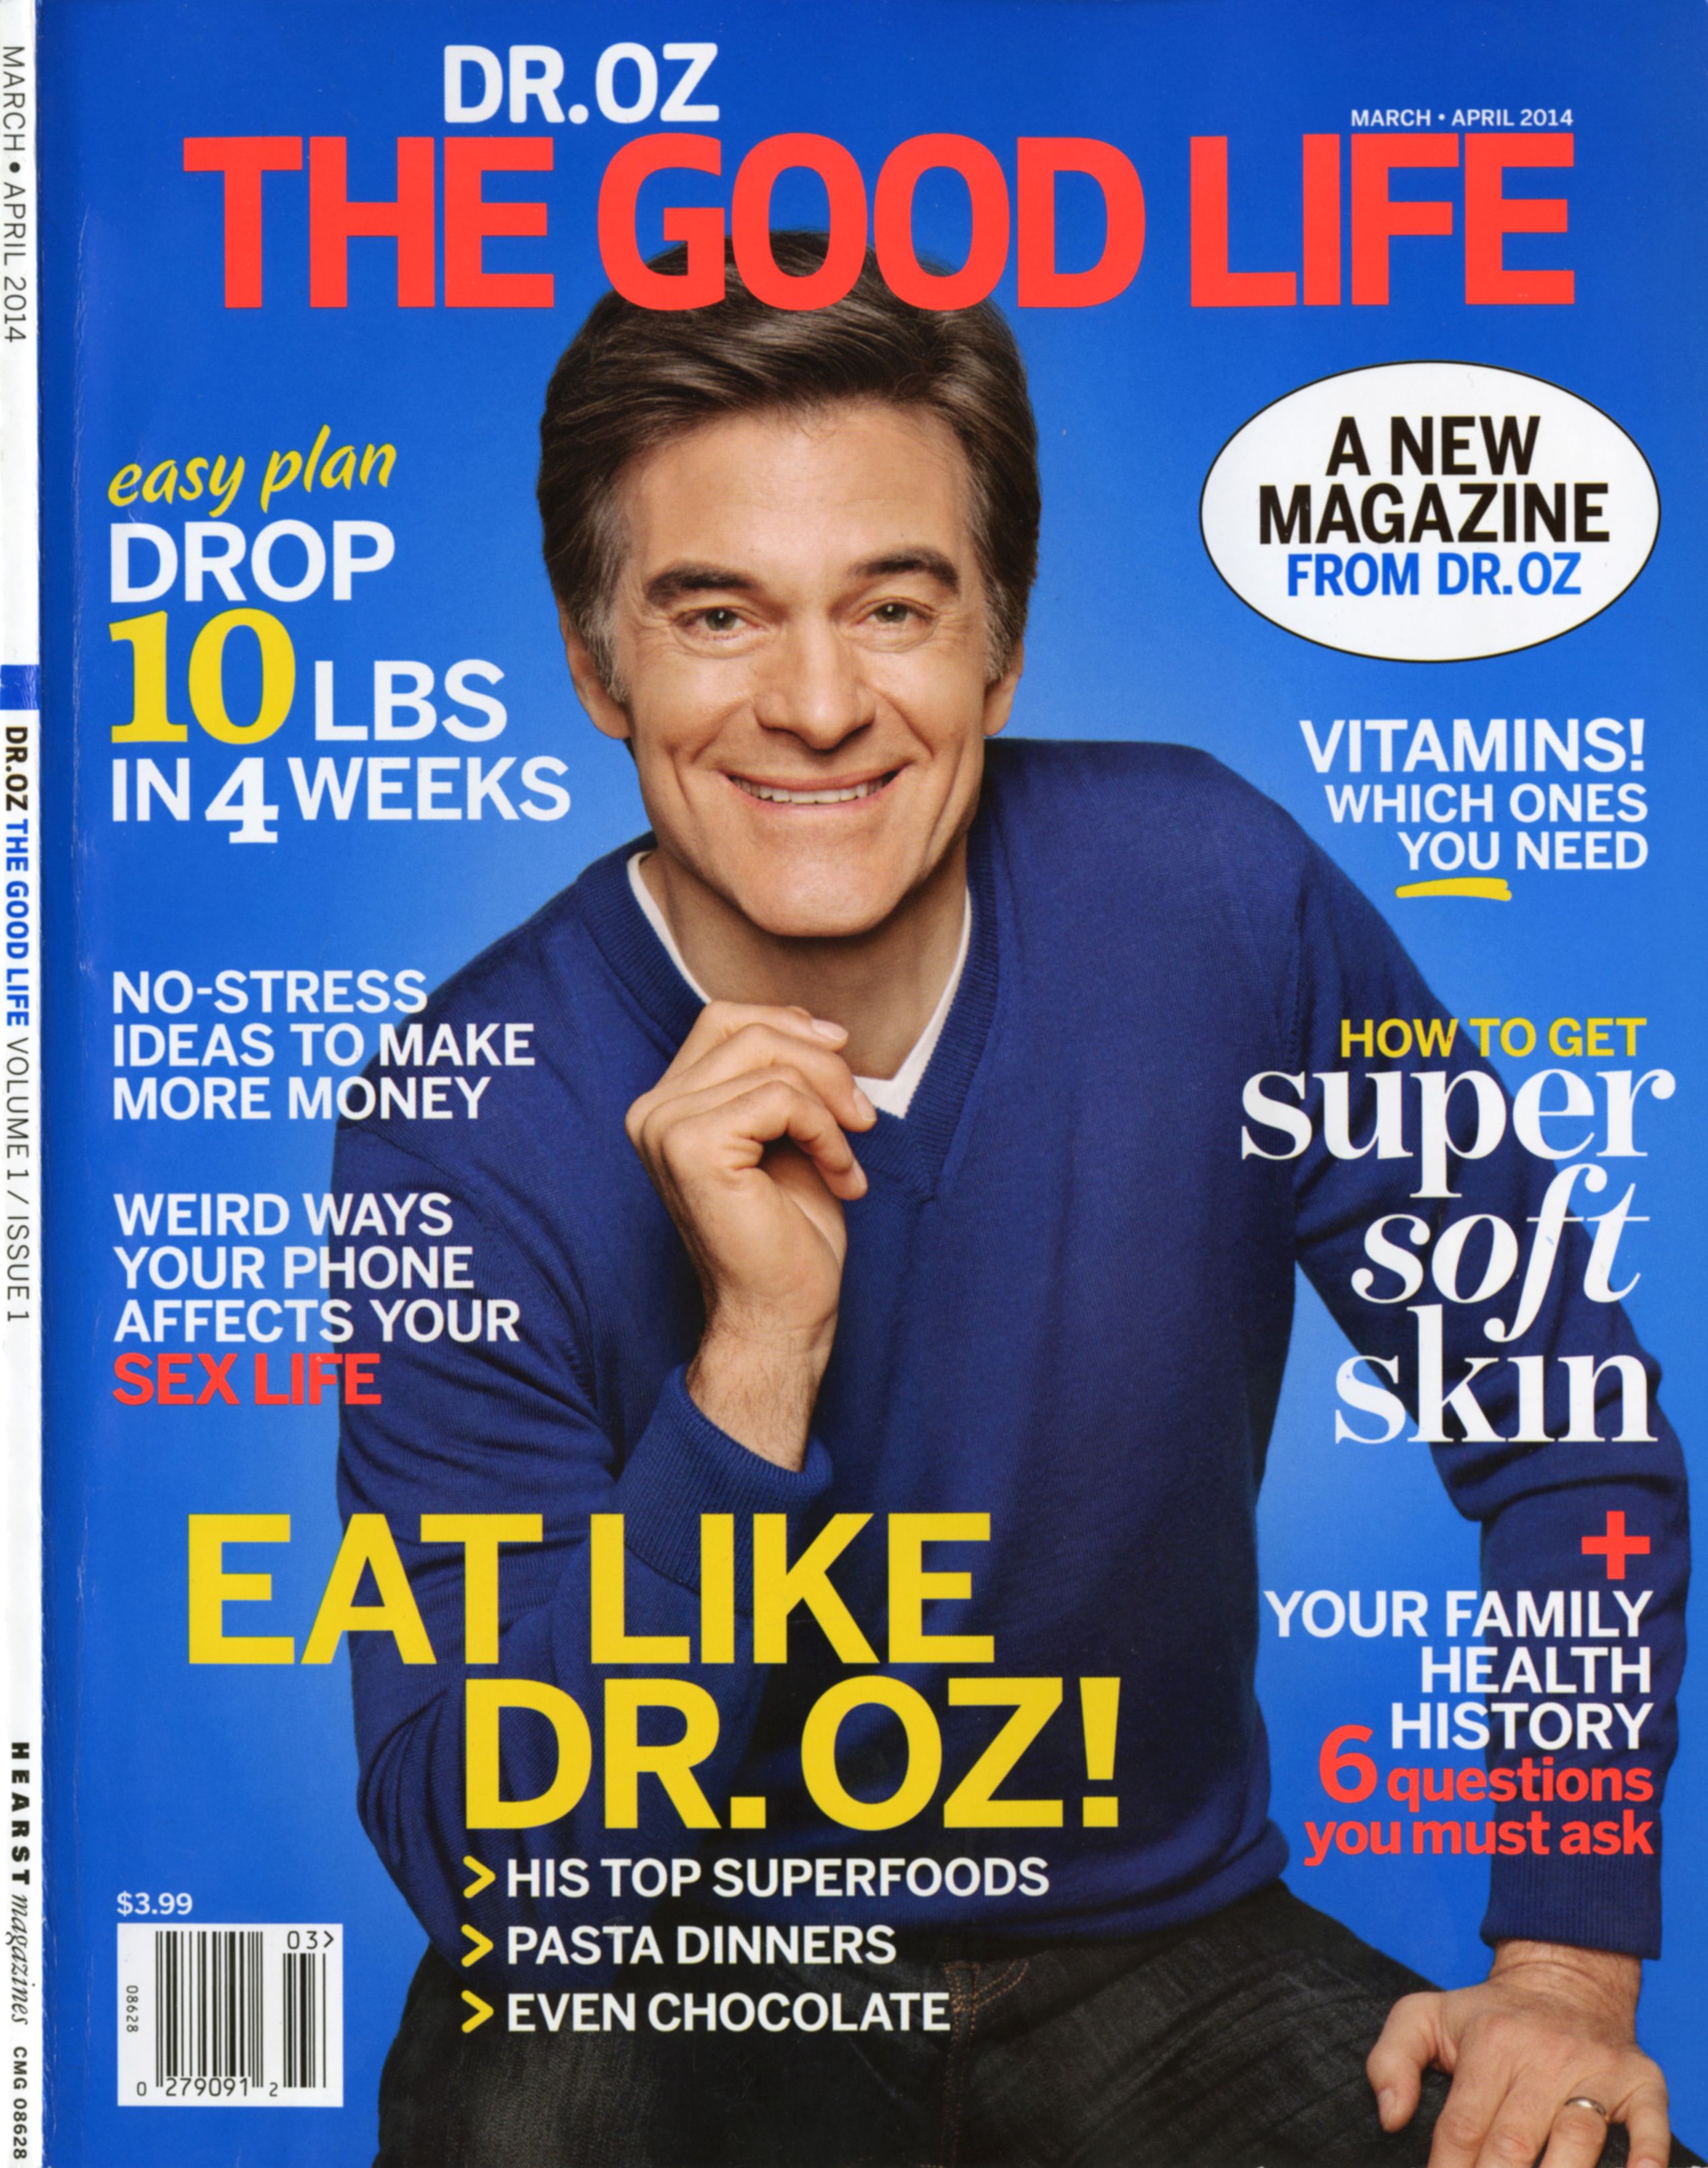 The making of Dr. Oz - Vox